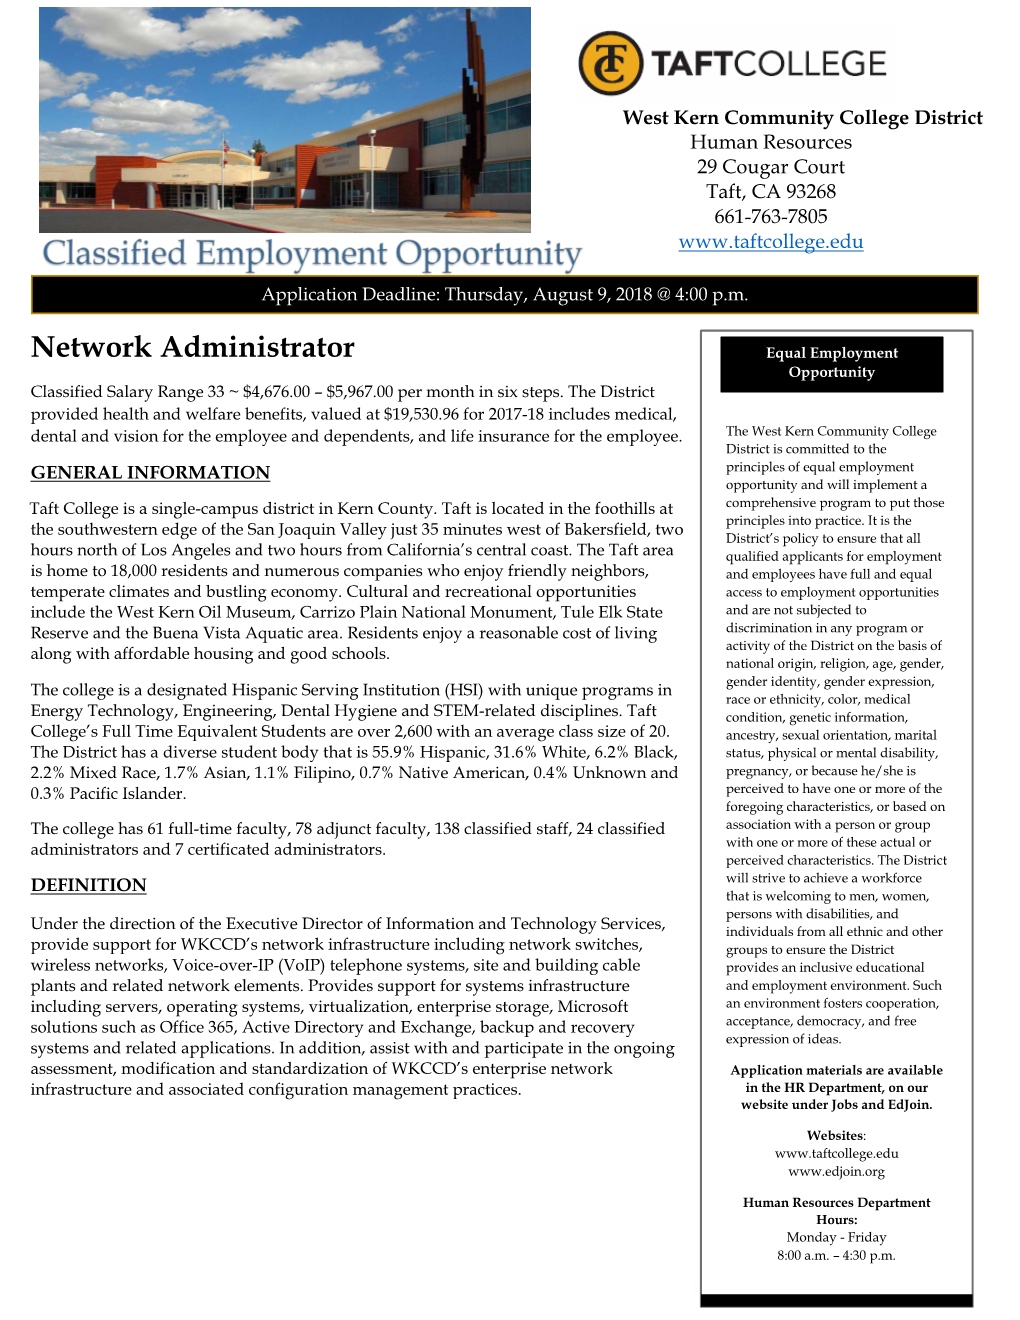 Network Administrator Equal Employment Opportunity Classified Salary Range 33 ~ $4,676.00 – $5,967.00 Per Month in Six Steps